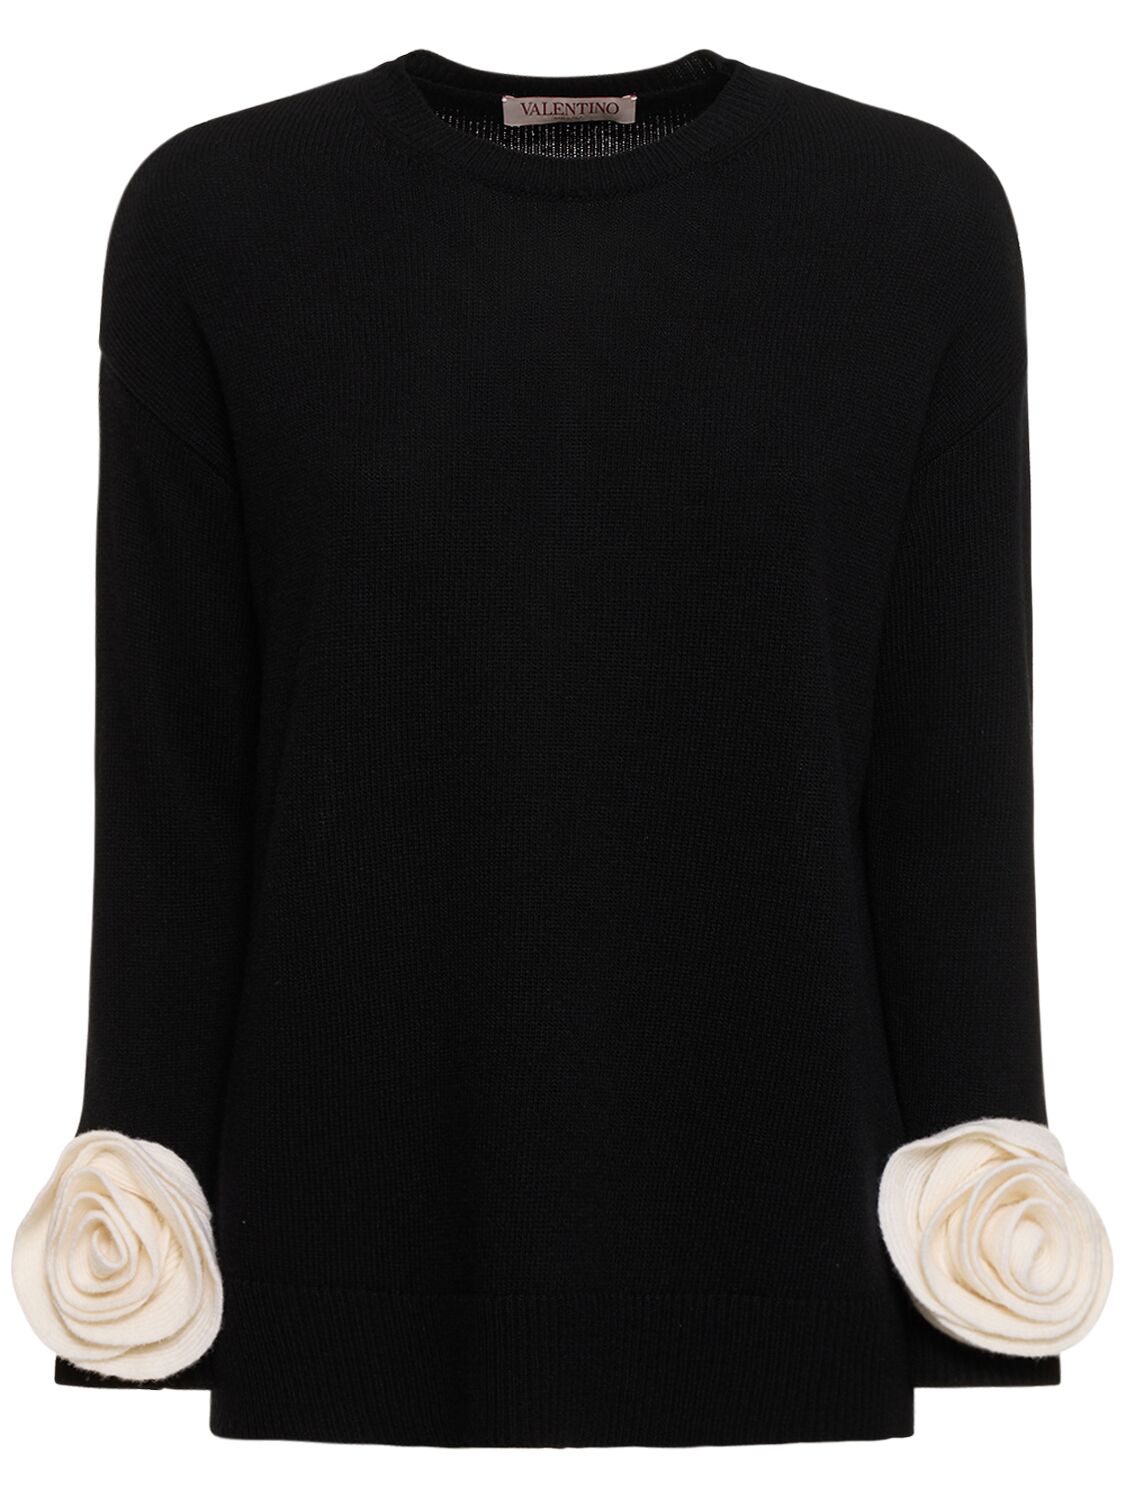 Wool Knit Sweater W/ Collar And Roses